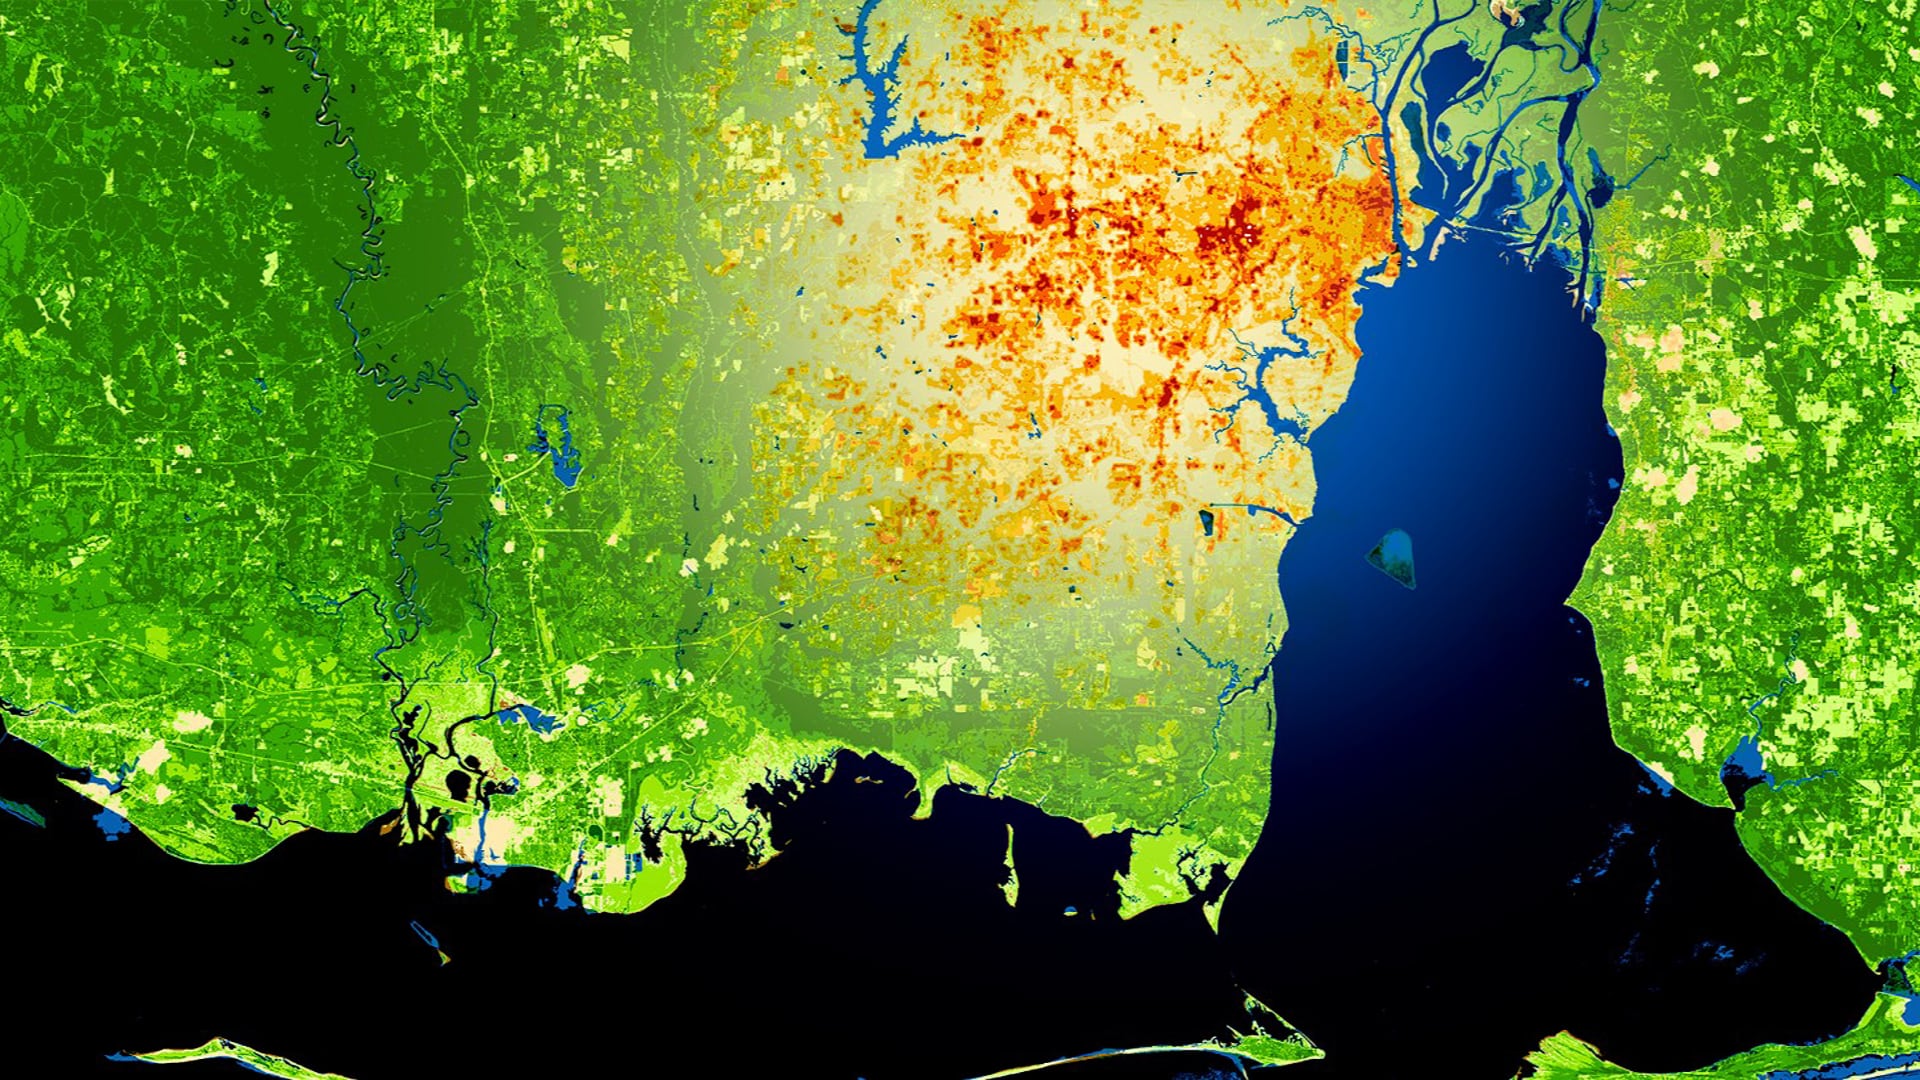 Focused on of the southern half of Mobile County, Alabama, this is an NDVI-processed image overlaid by a land surface temperature (LST) layer obtained from 2019 Landsat 8 OLI/TIRS data. The darker red in the overlay indicate higher LST and lighter yellow shades indicate lower LST. The lighter green tones in the base image represent less healthy vegetation and darker tones represent healthier vegetation. Maps like this help partners identify and mitigate the effects of urban heat islands.